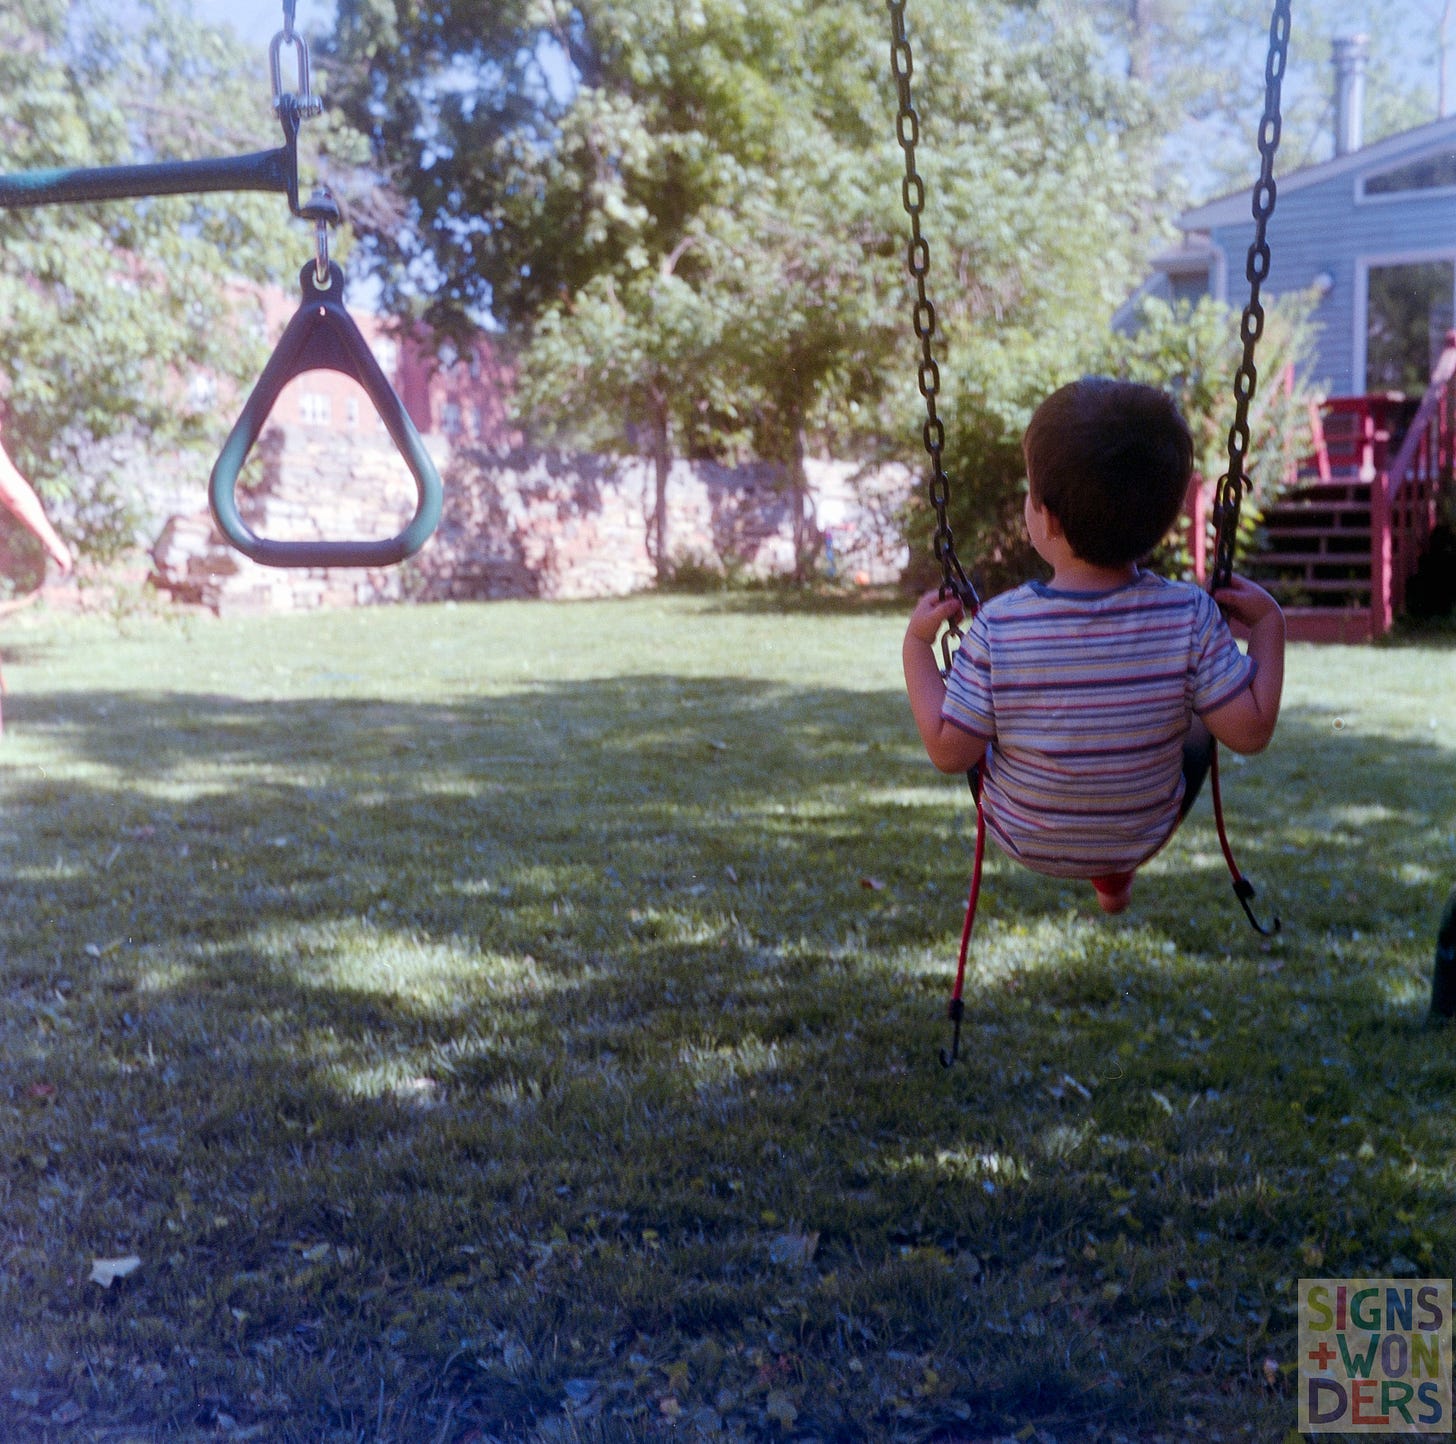 ID: The back of a small boy in a striped shirt as he sits on a swing.